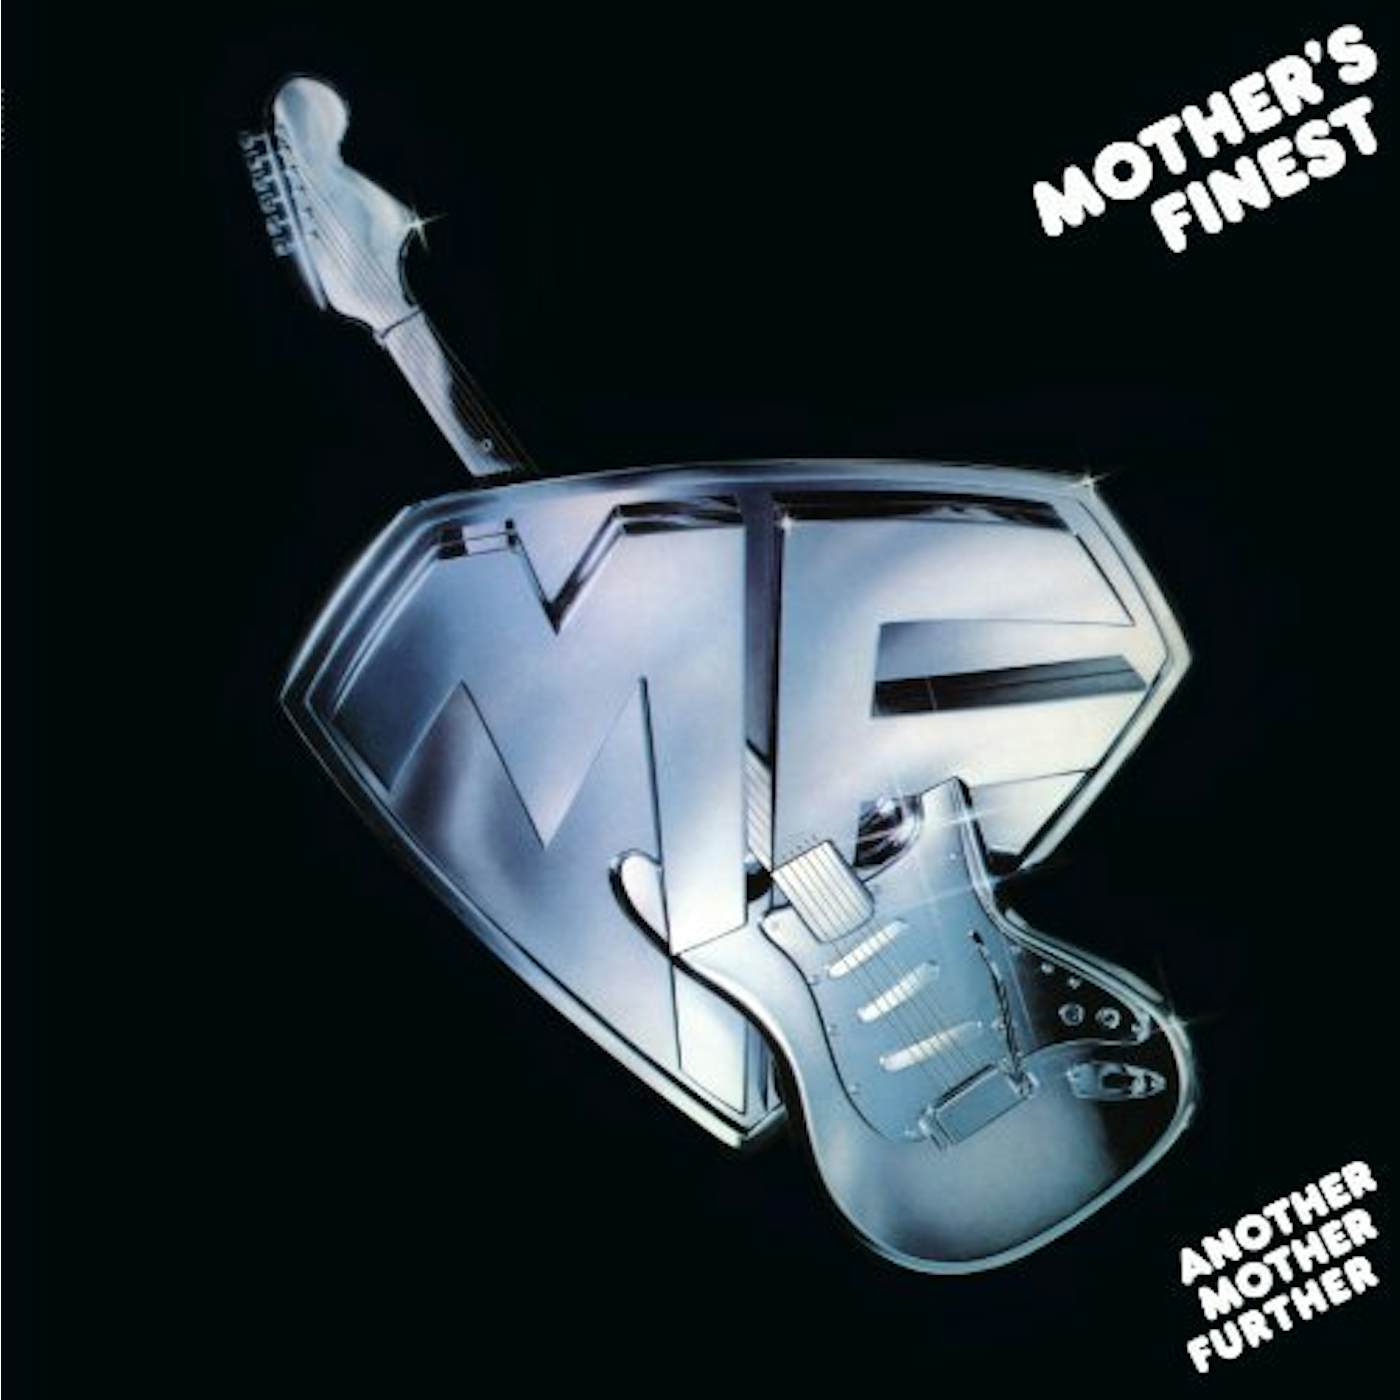 Mother's Finest Another Mother Further Vinyl Record